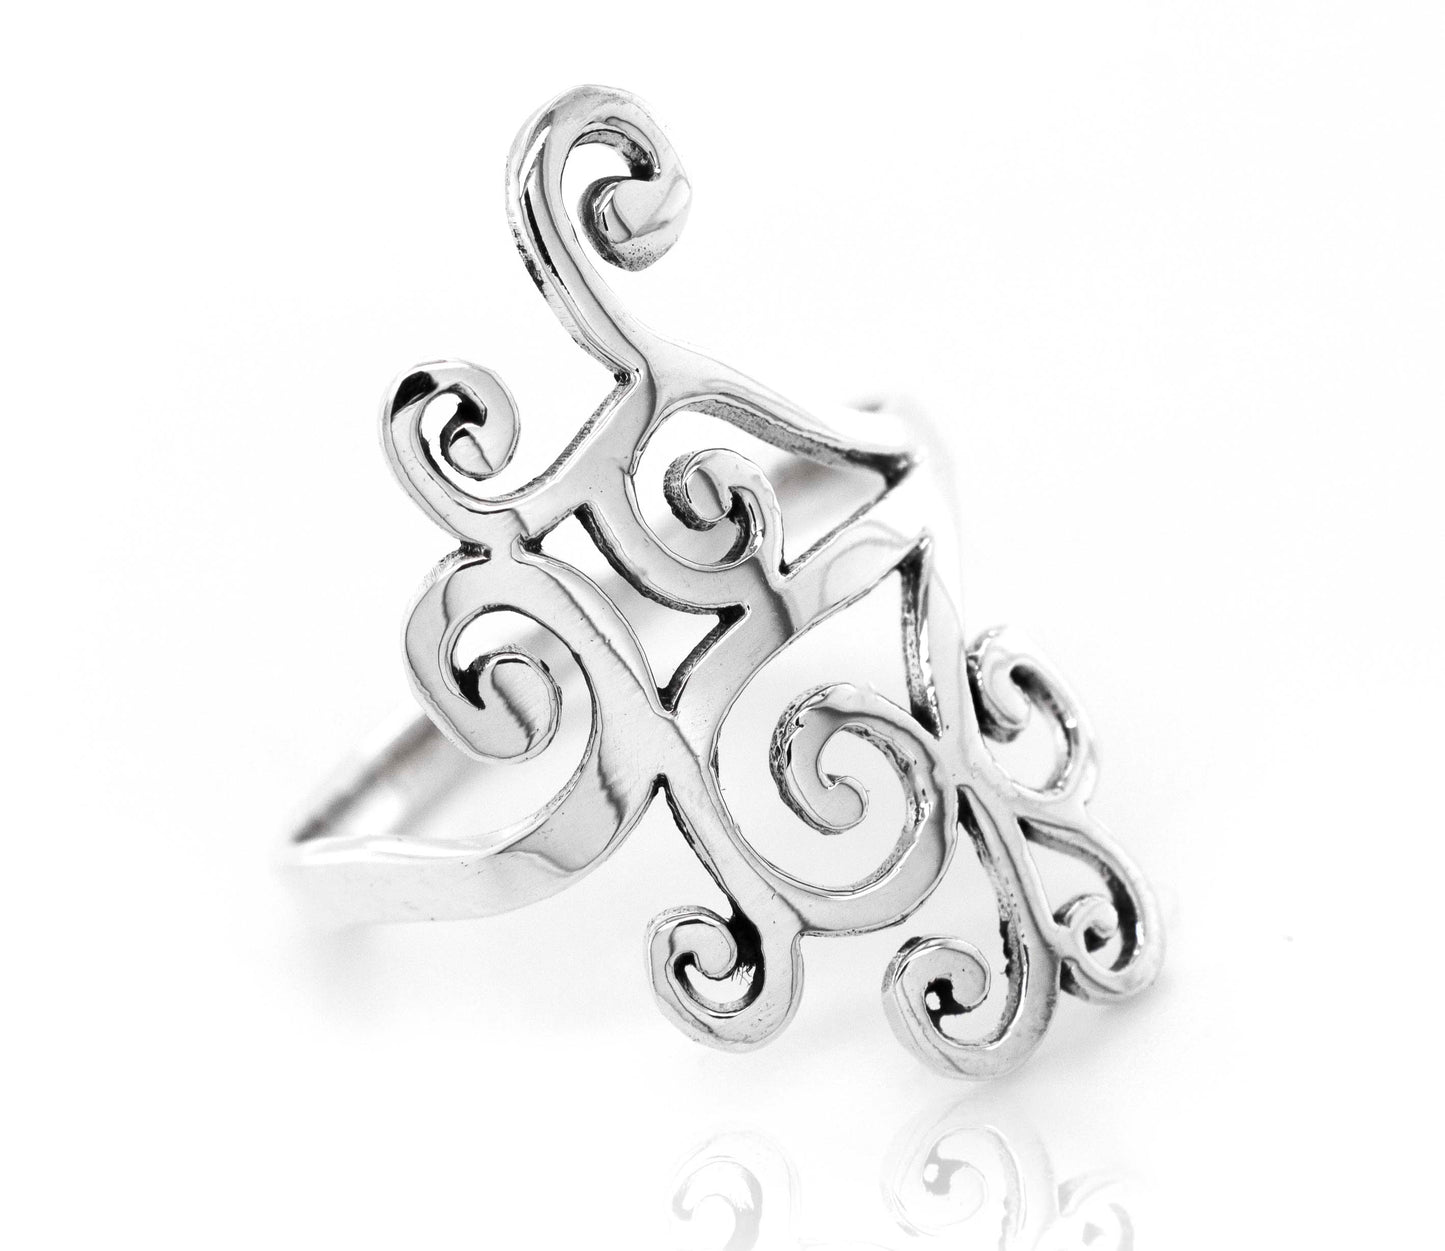 A Super Silver Swirl Design Ring with a .925 silver material.